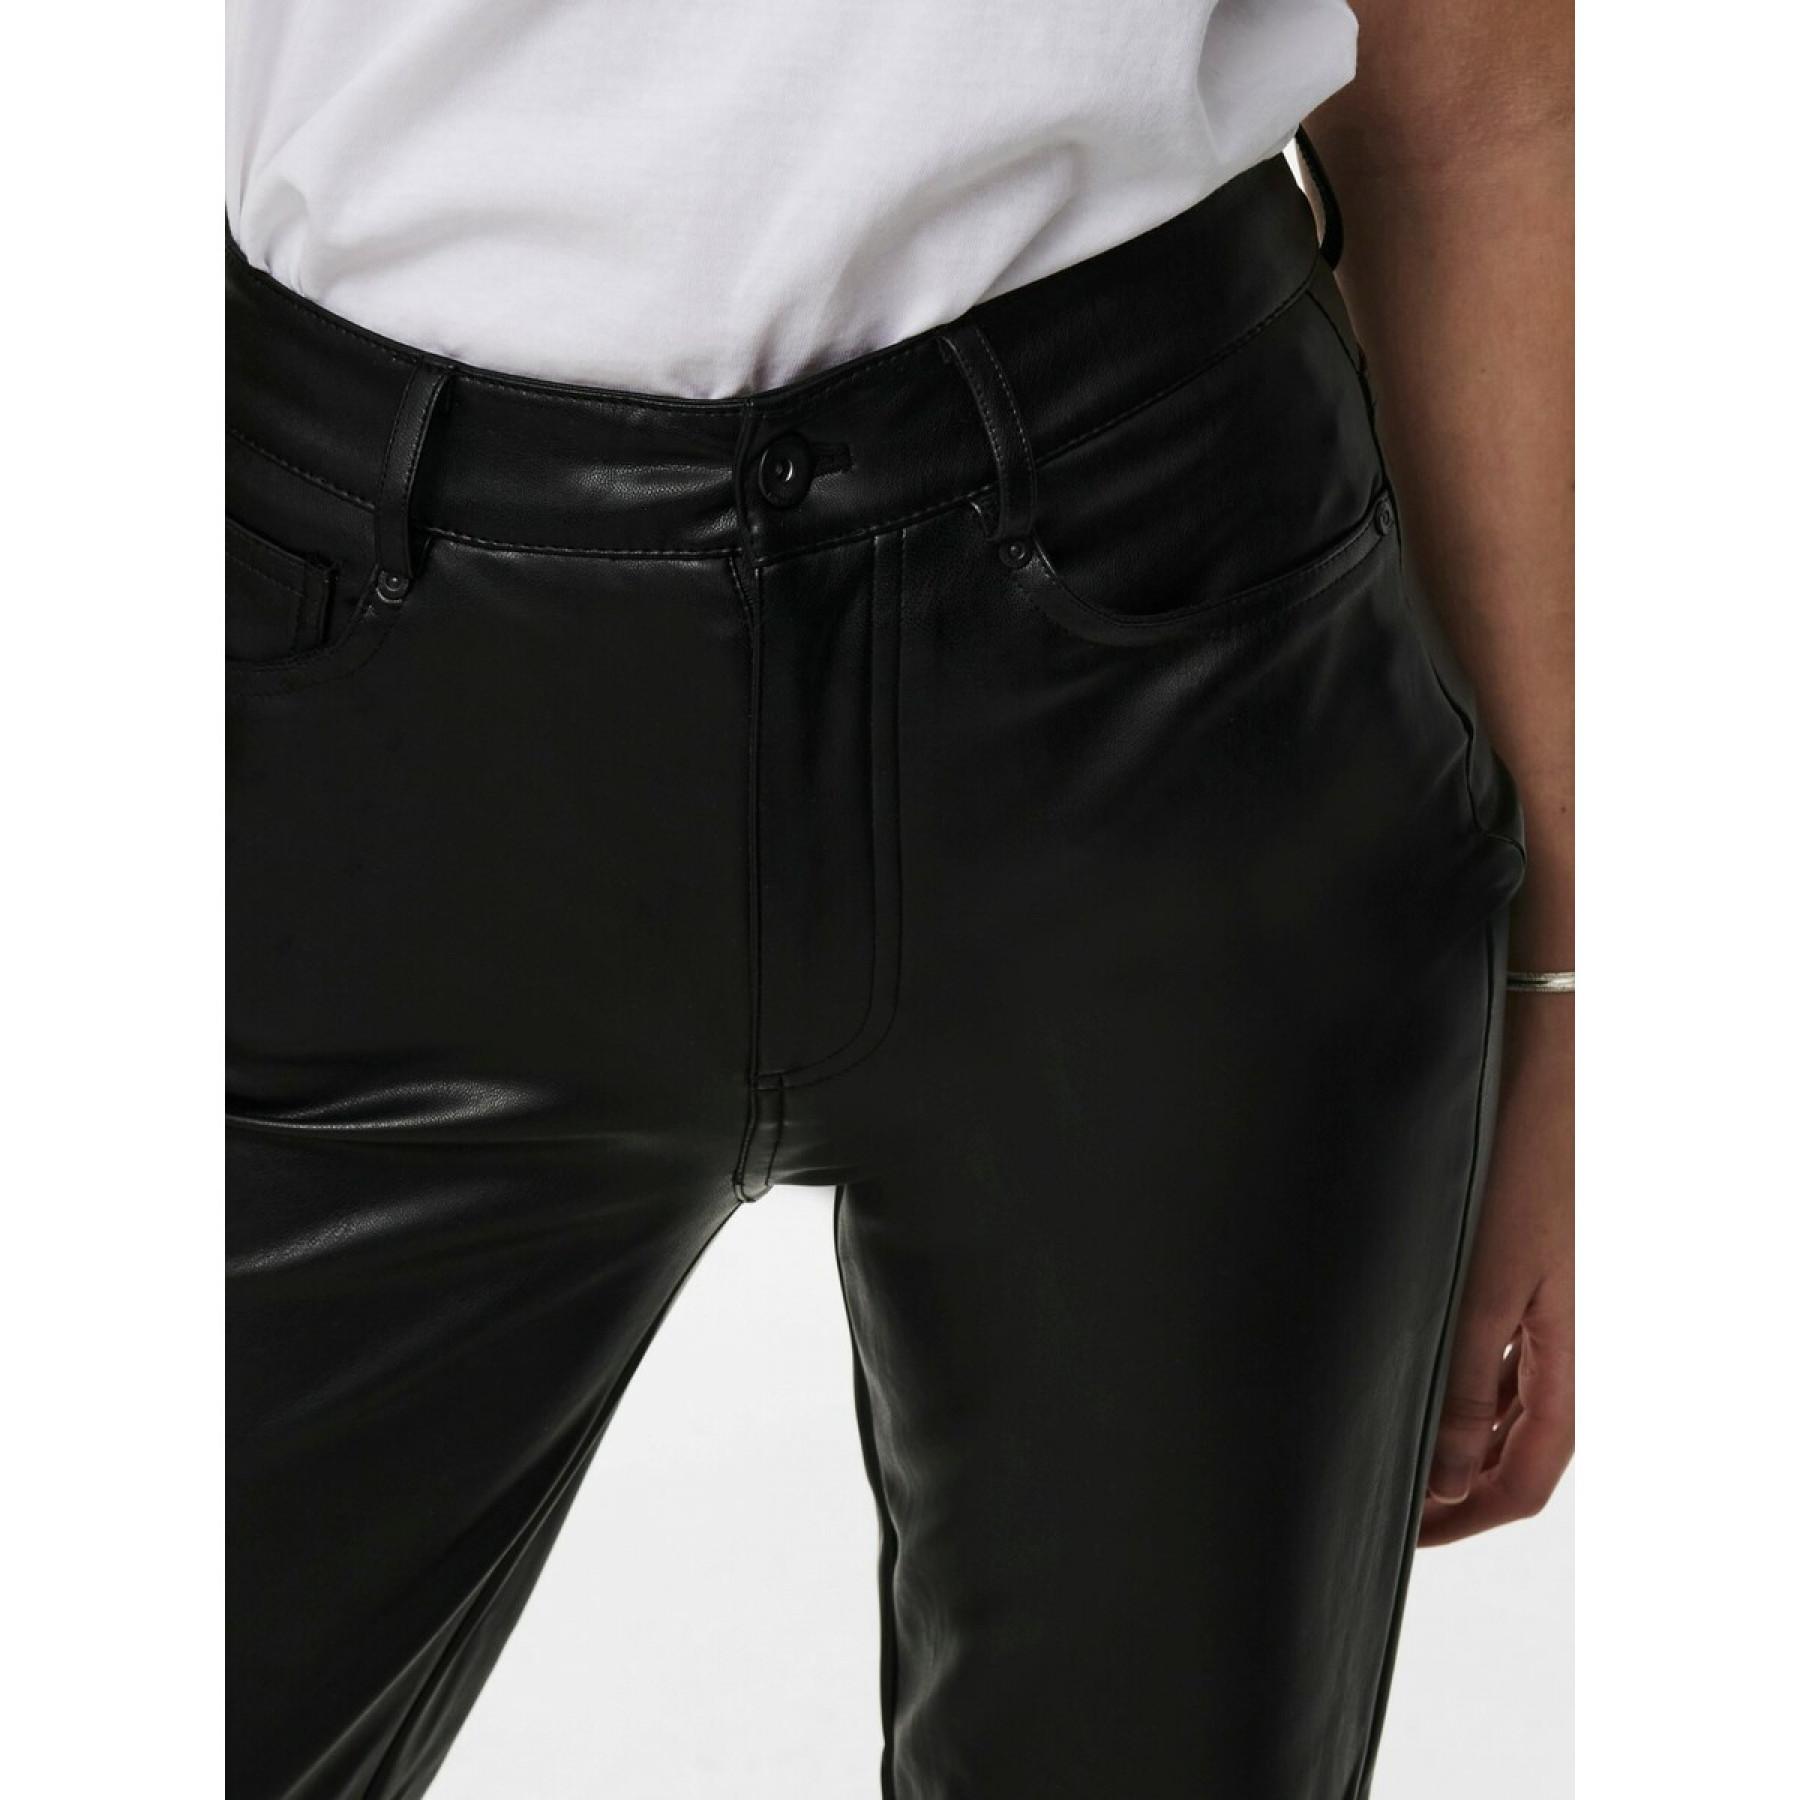 Women's trousers Only Emily imitation cuir